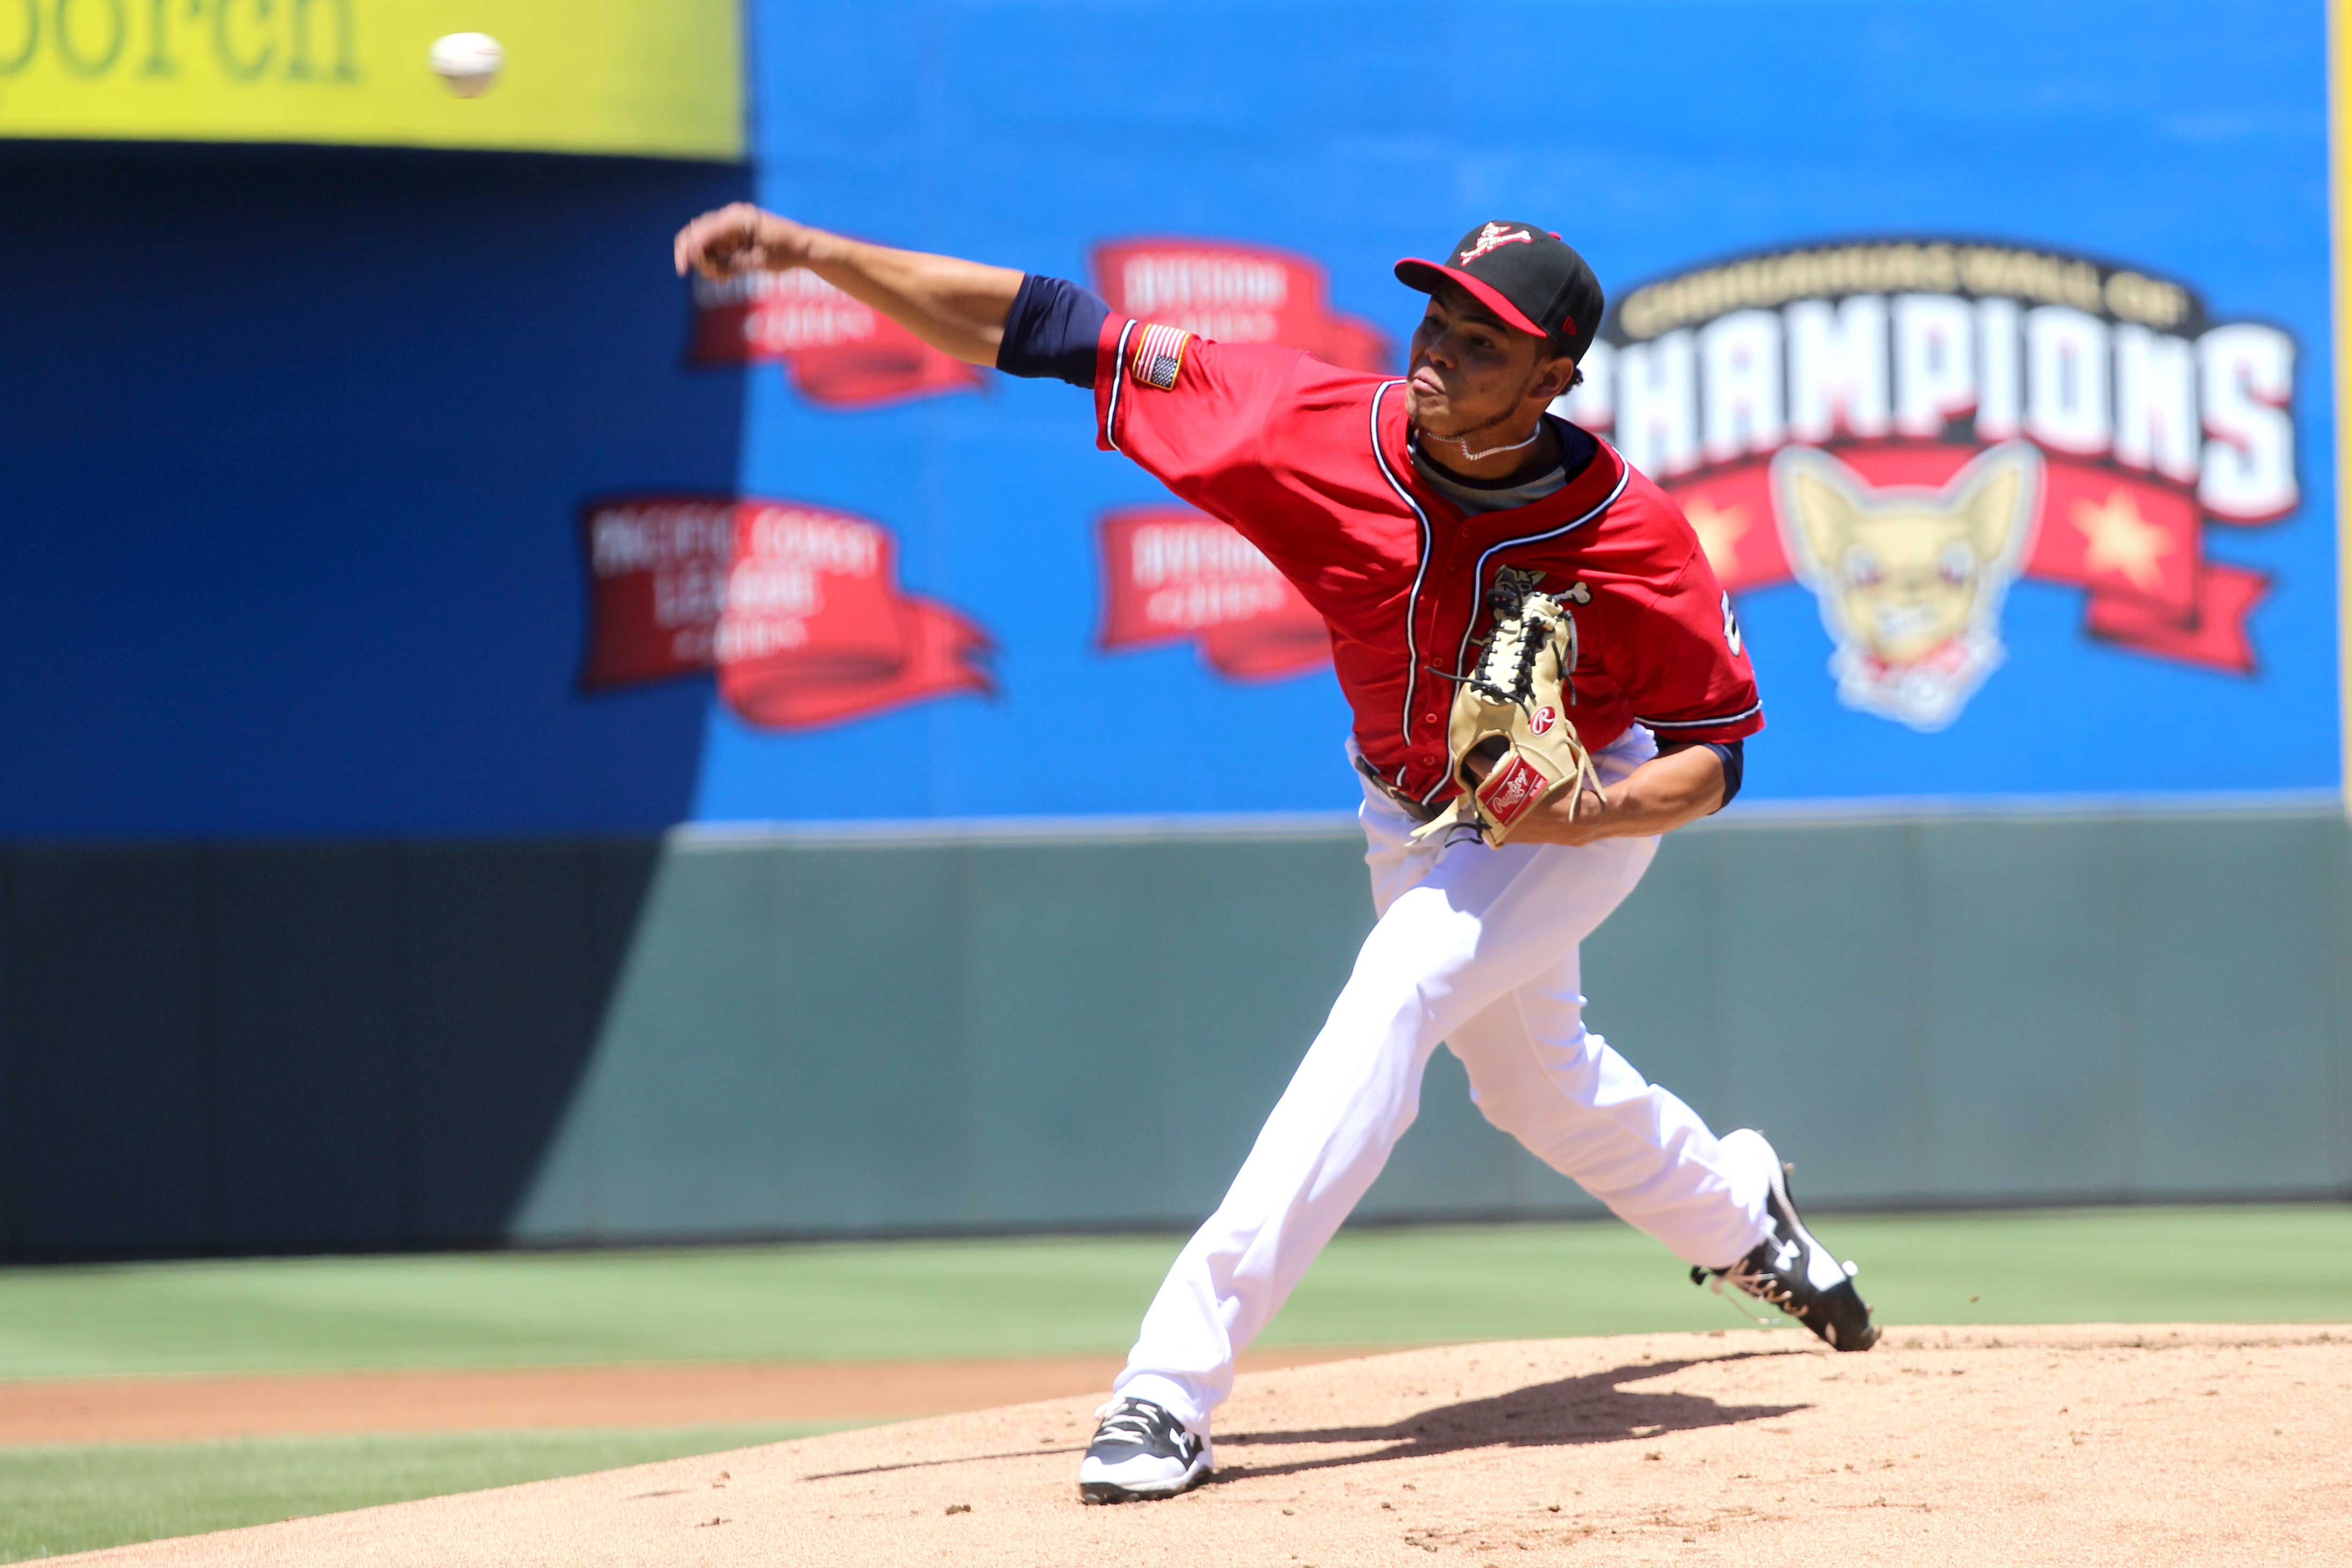 Chihuahuas+pitching+overcomes+51s